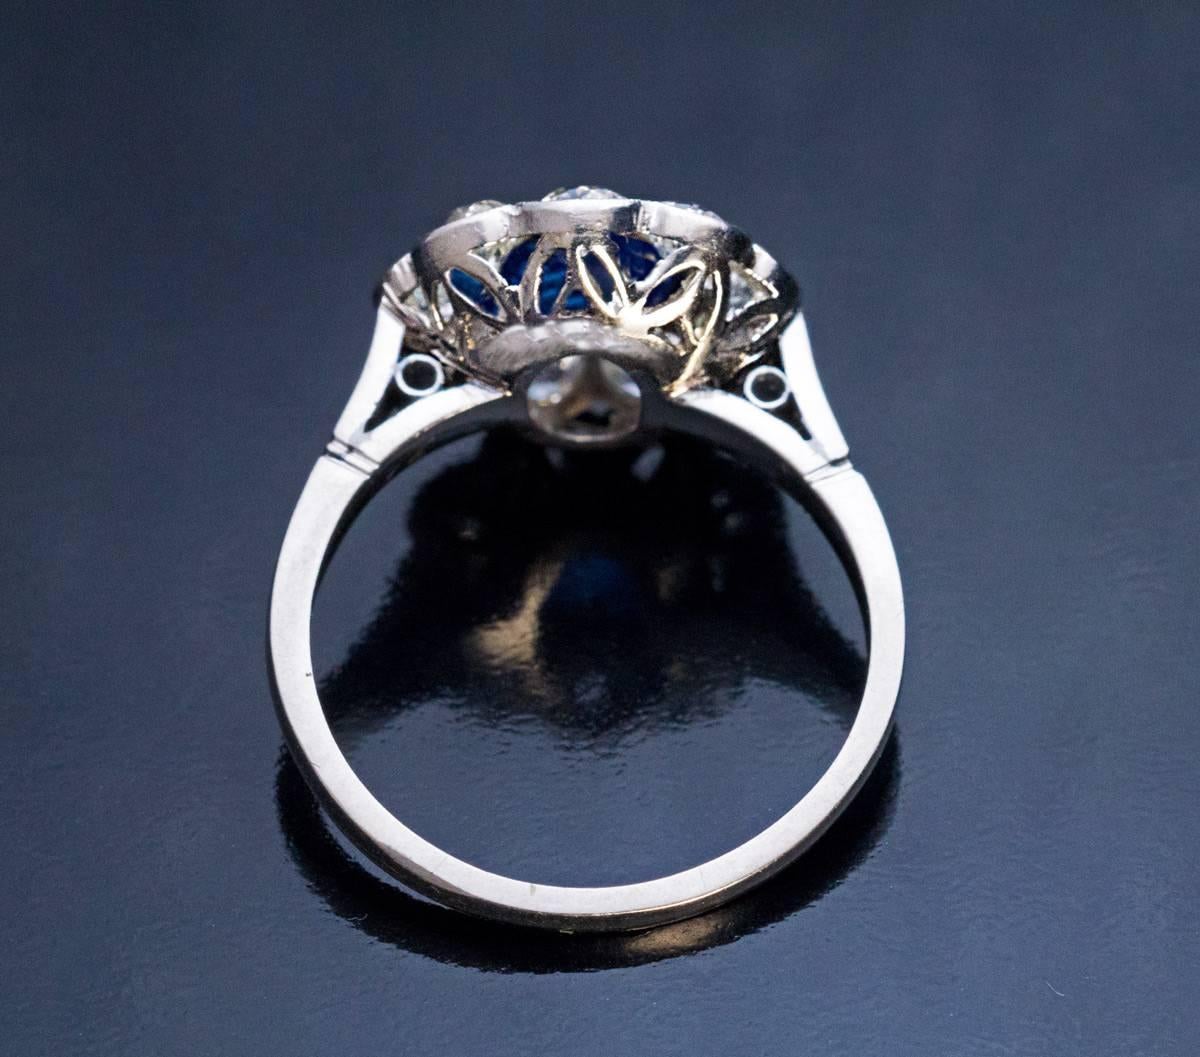 Circa 1920s
A vintage milgrain platinum engagement ring of a classic cluster design is centered with a royal blue sapphire (approximately 1 carat) surrounded by nine sparkling bright white mostly old European cut diamonds (G color, SI